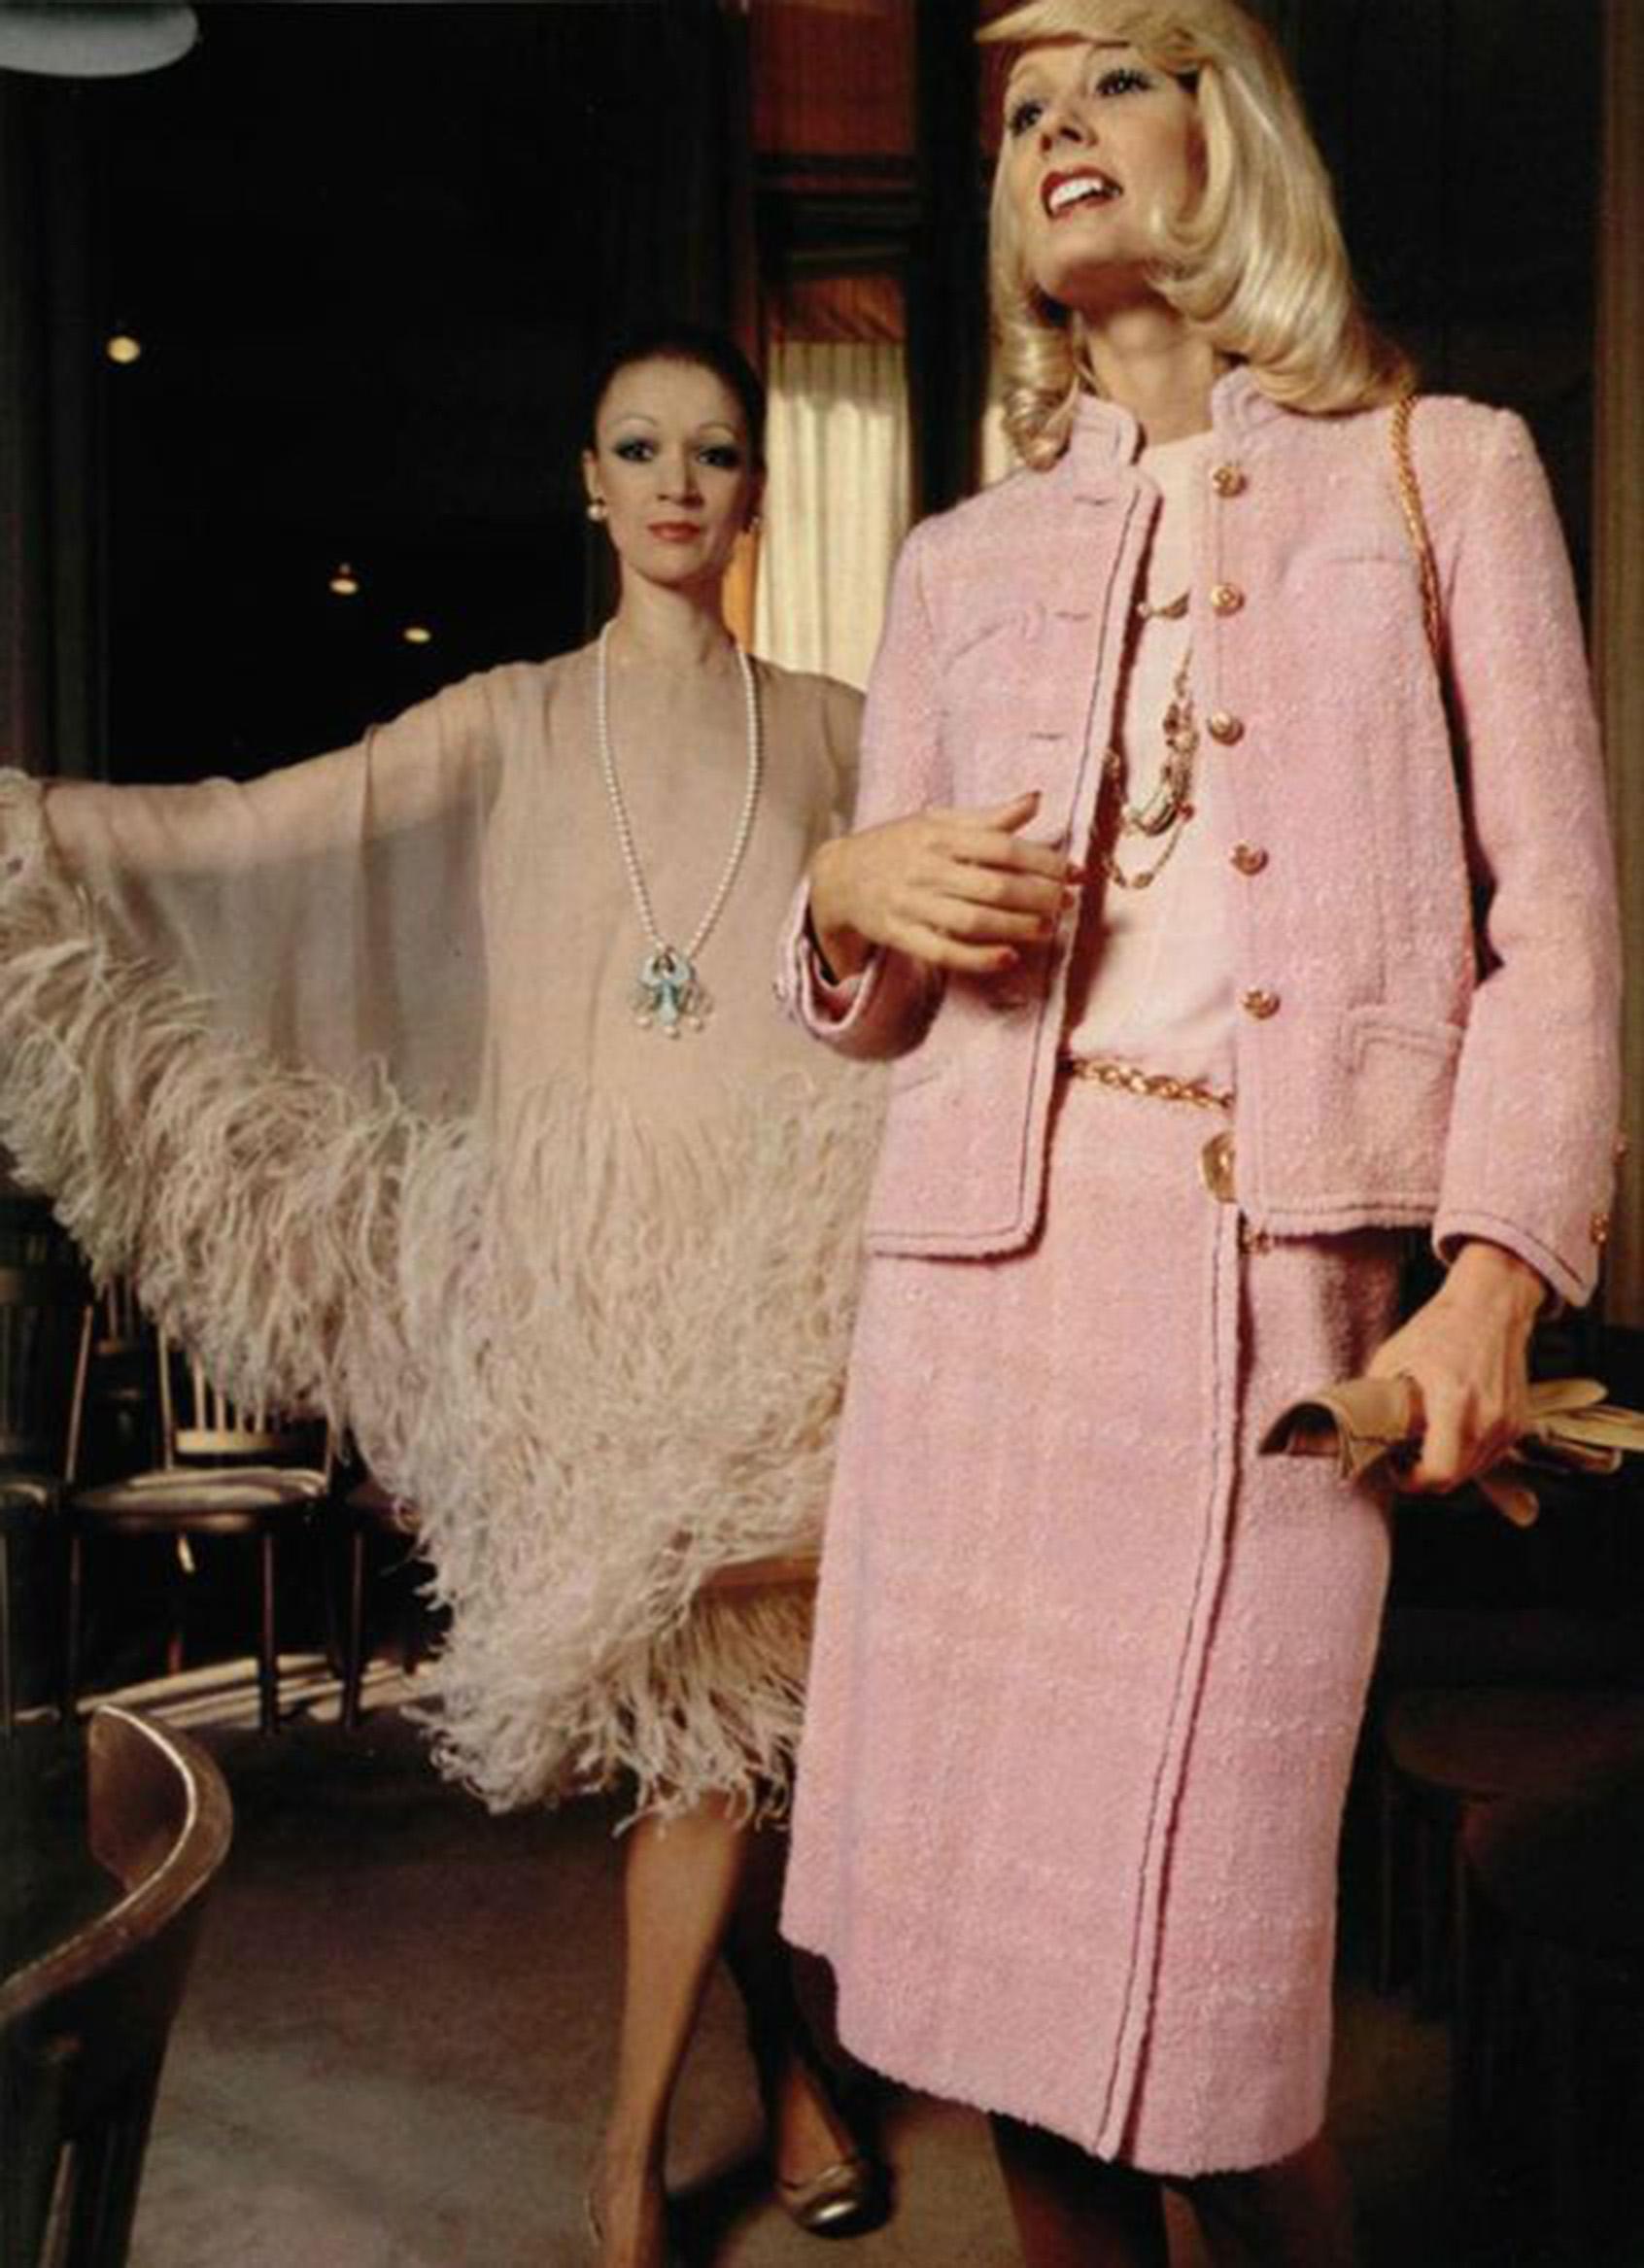 A highly coveted and instantly recognizable Chanel haute couture custom commissioned pink wool three piece suit from fall-winter 1973. This gorgeous baby pink color is such a rarity! The stunning ensemble is also very well-documented, having a full